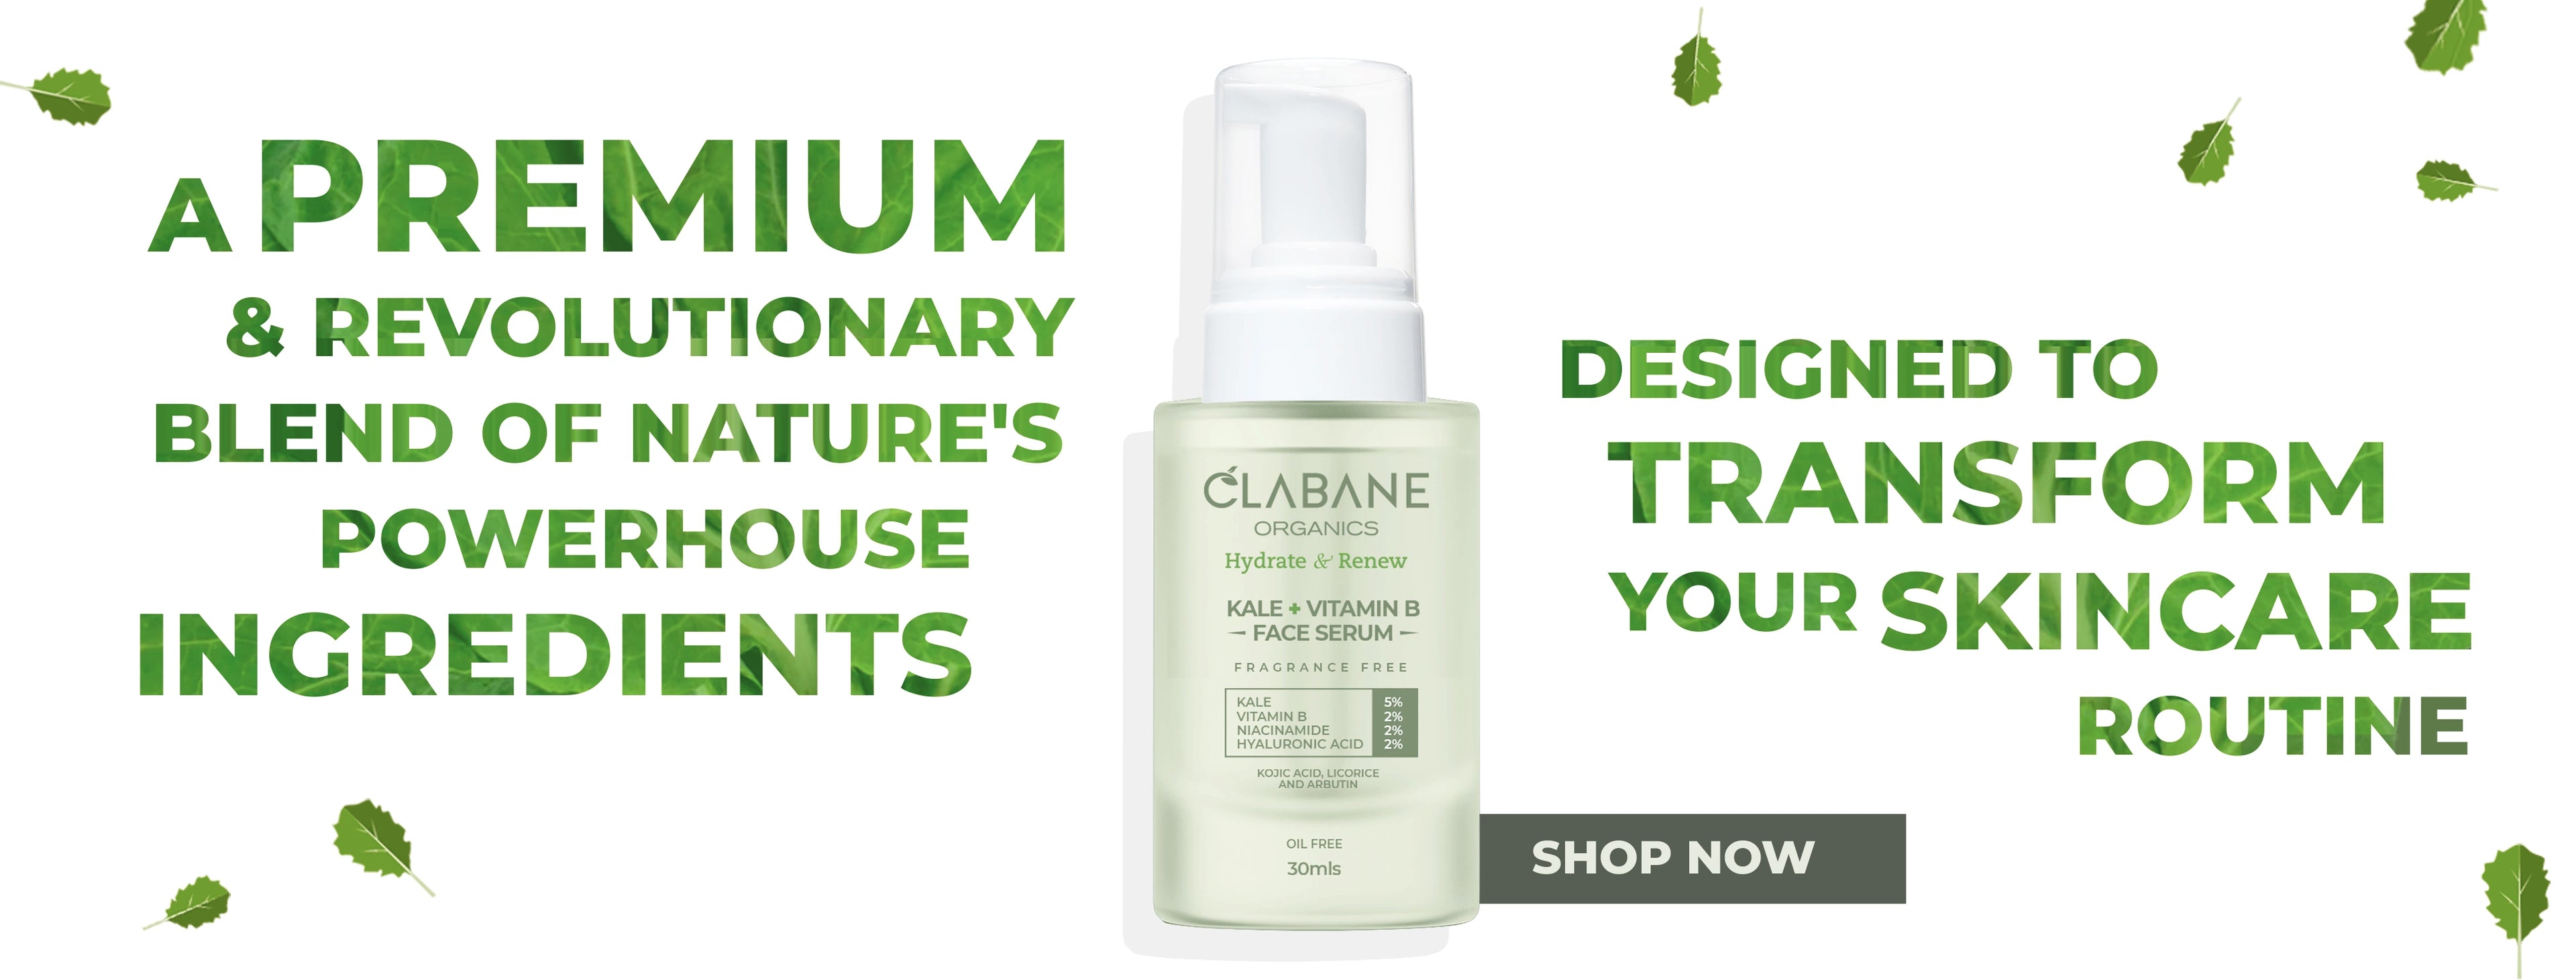 Elevate your skincare routine with the Clabane Hydrated and Renew Organics Kale + Vitamin B Face Serum